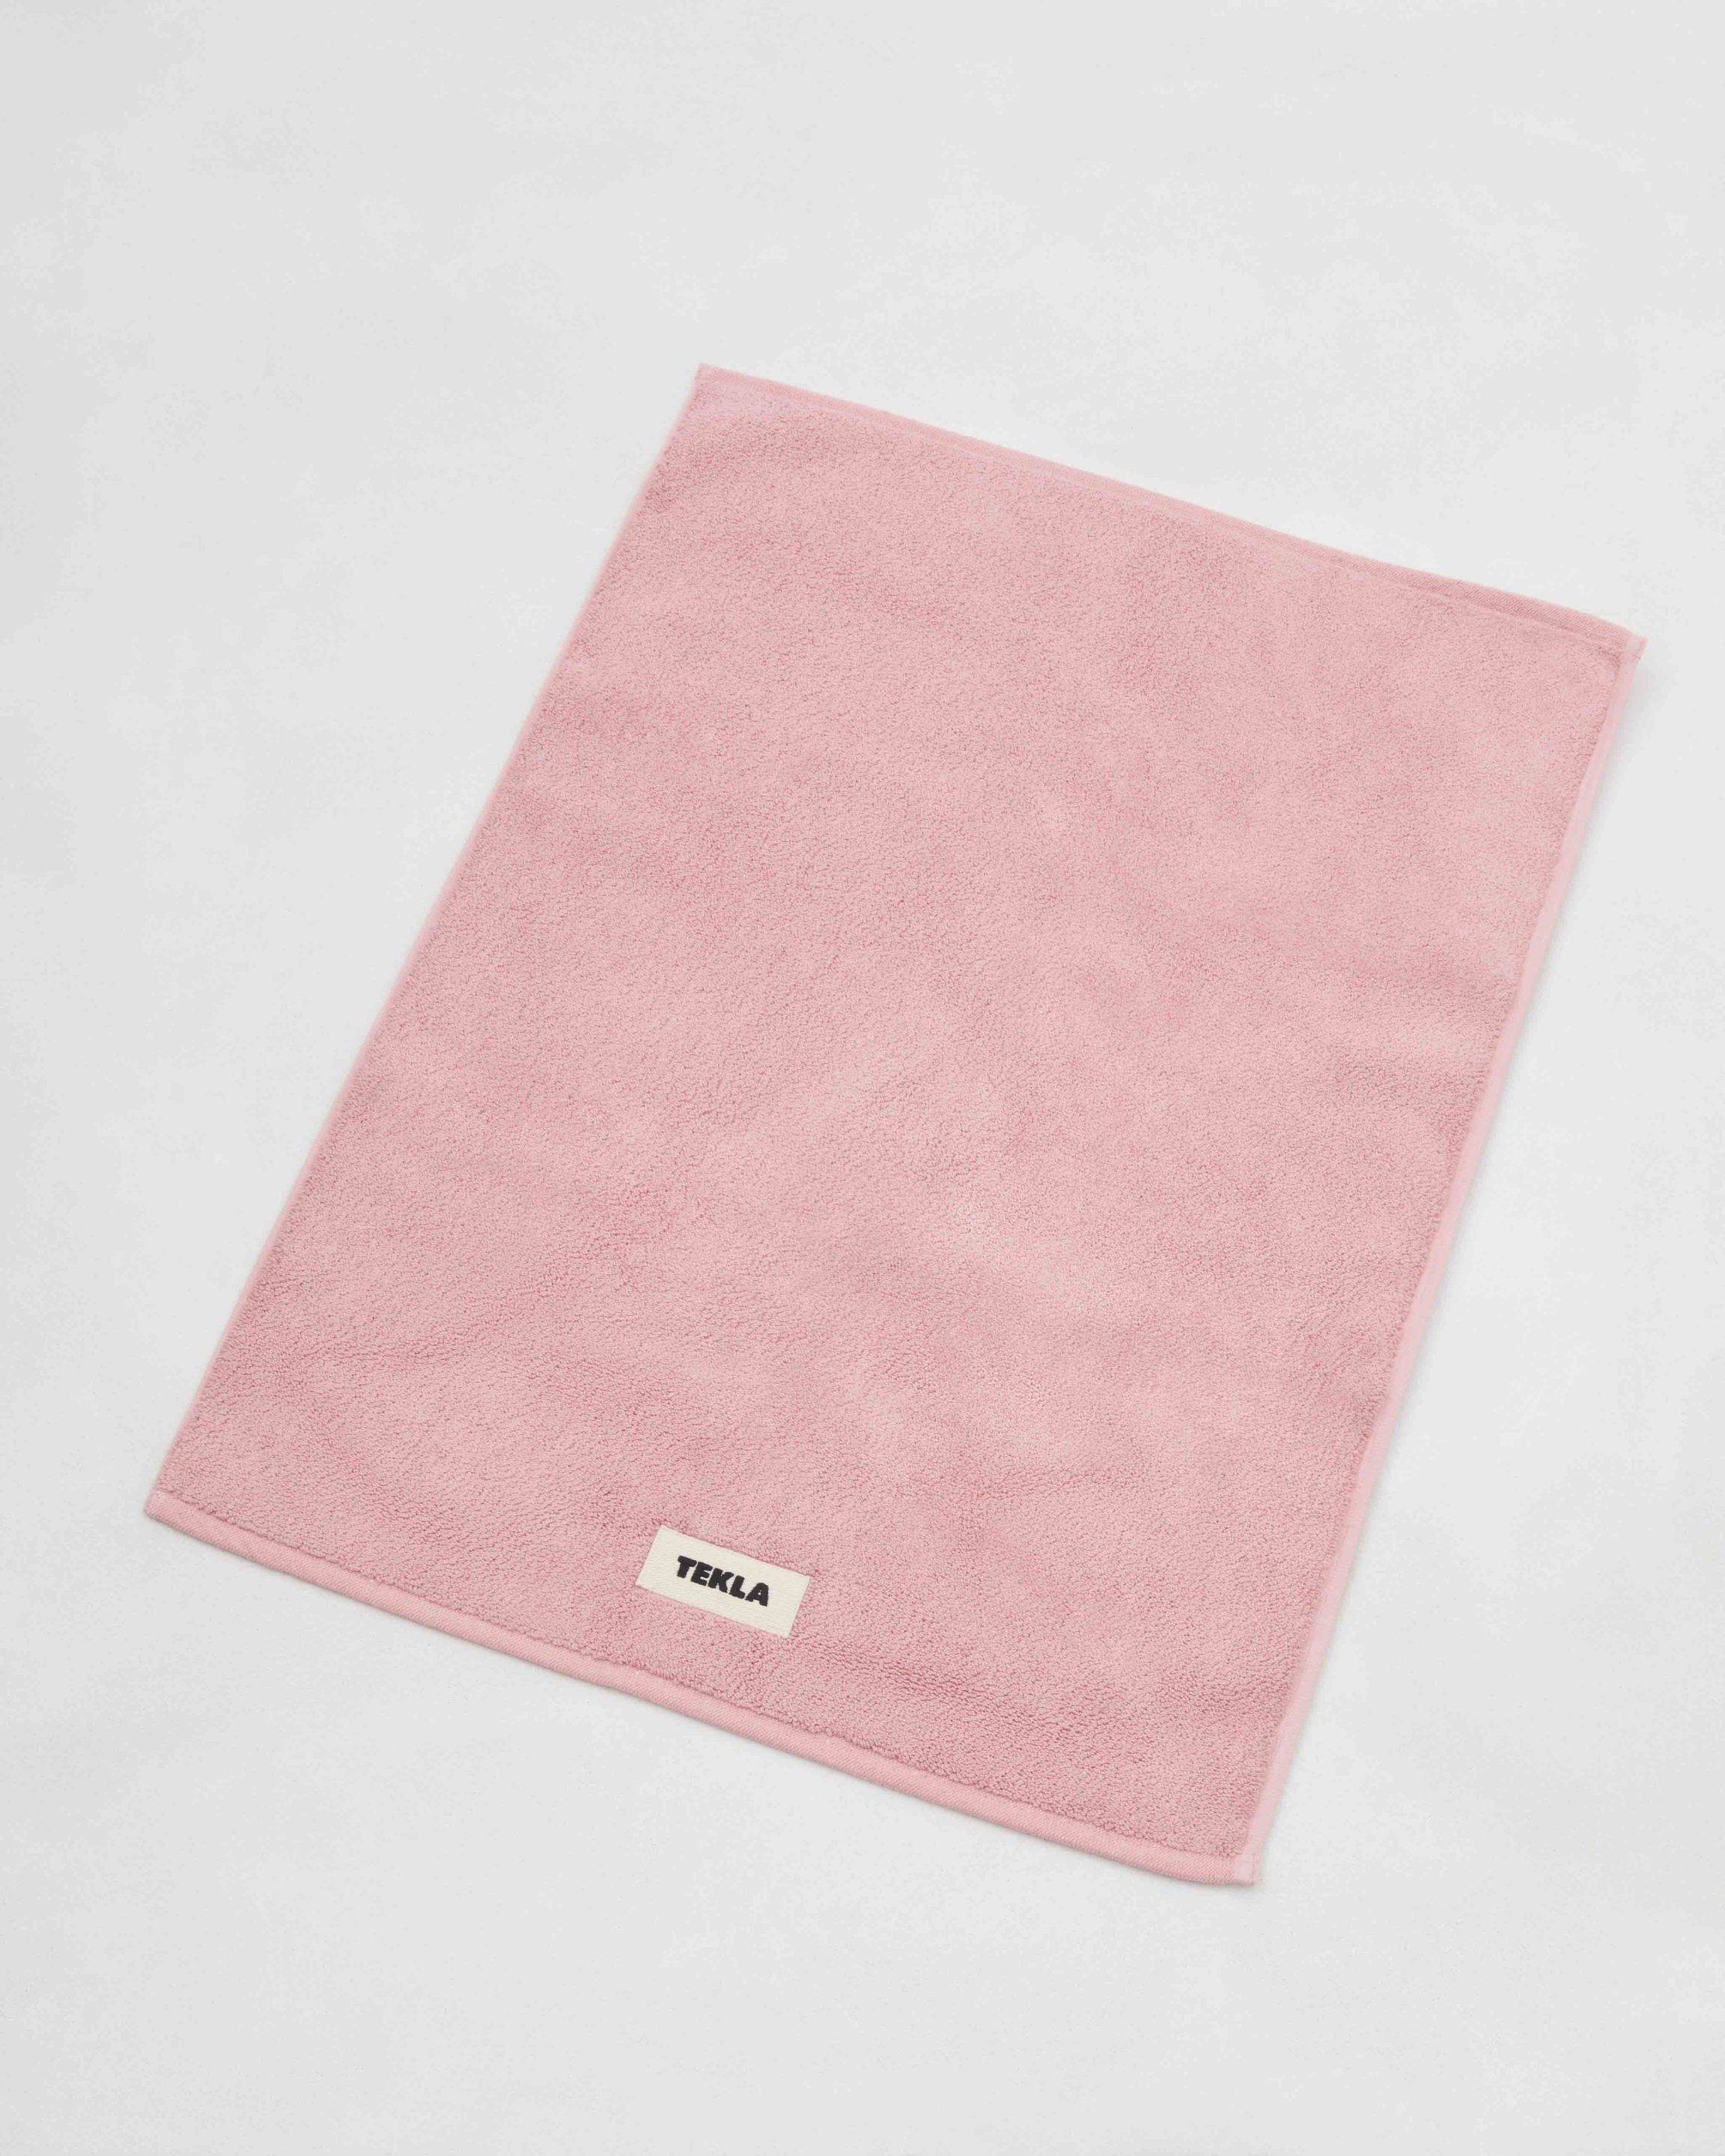 Bath Mat - Solid - Shaded Pink